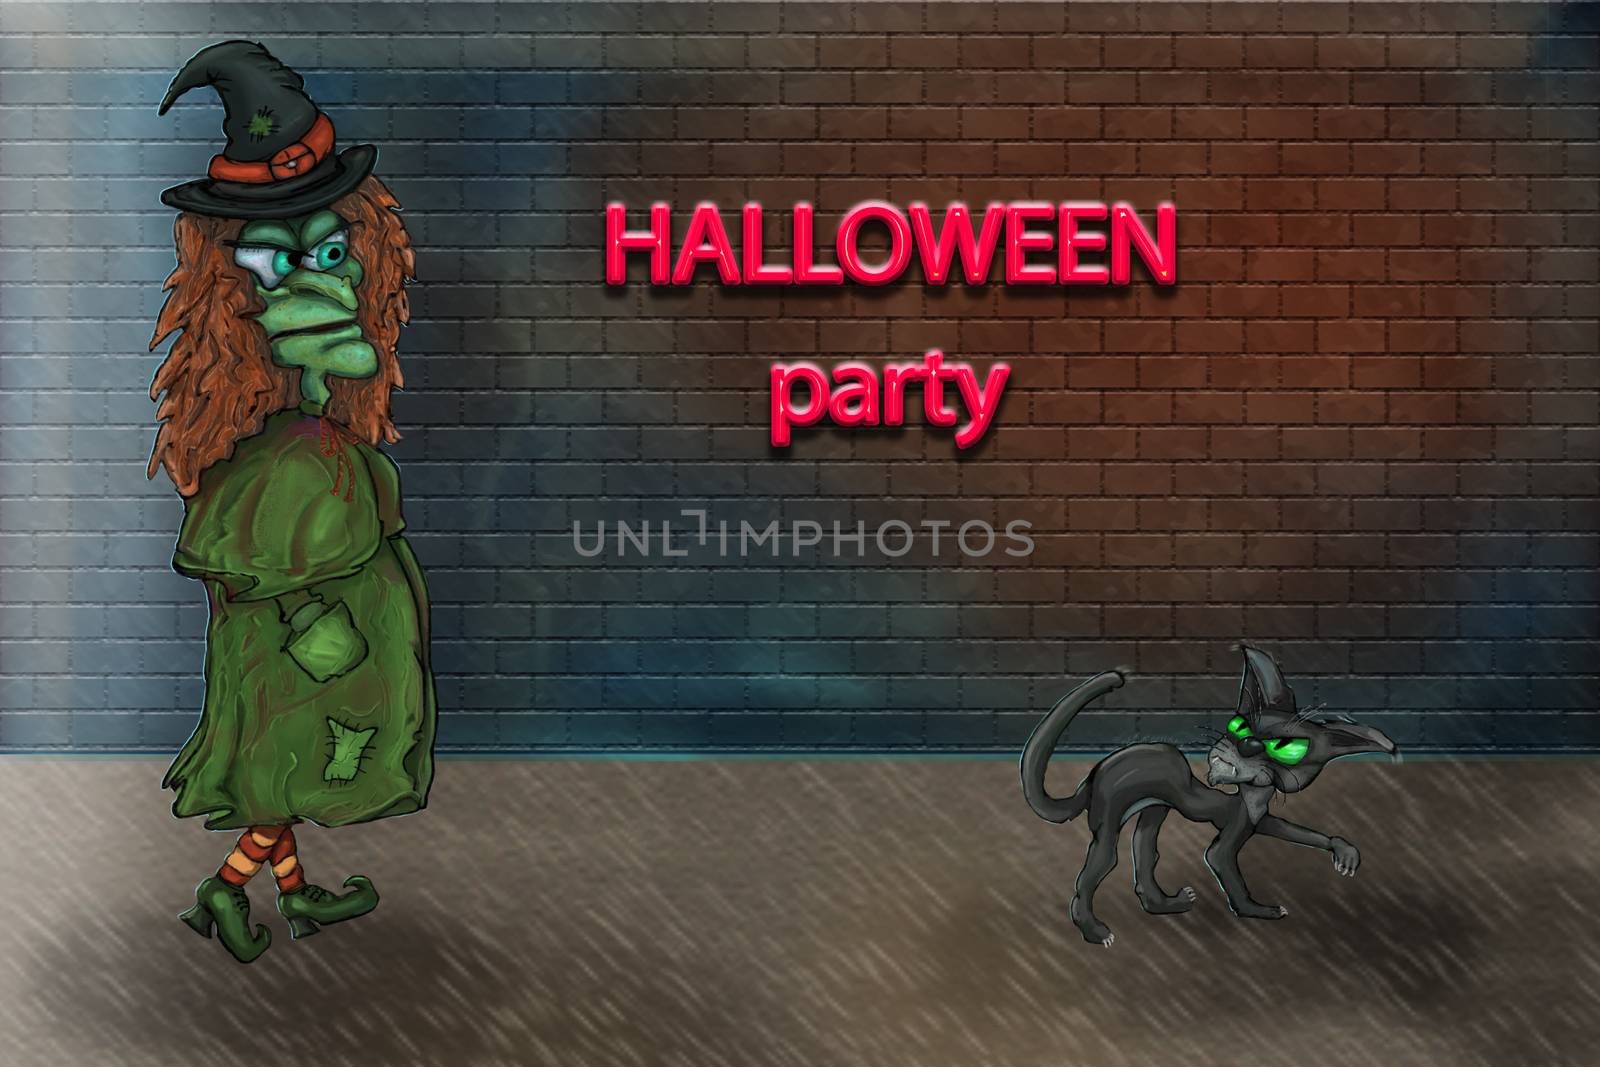 Invitation design for Halloween party with green Witch and black cat. Funny Halloween background. For greeting card, invitation, poster, flyer. Stock illustration